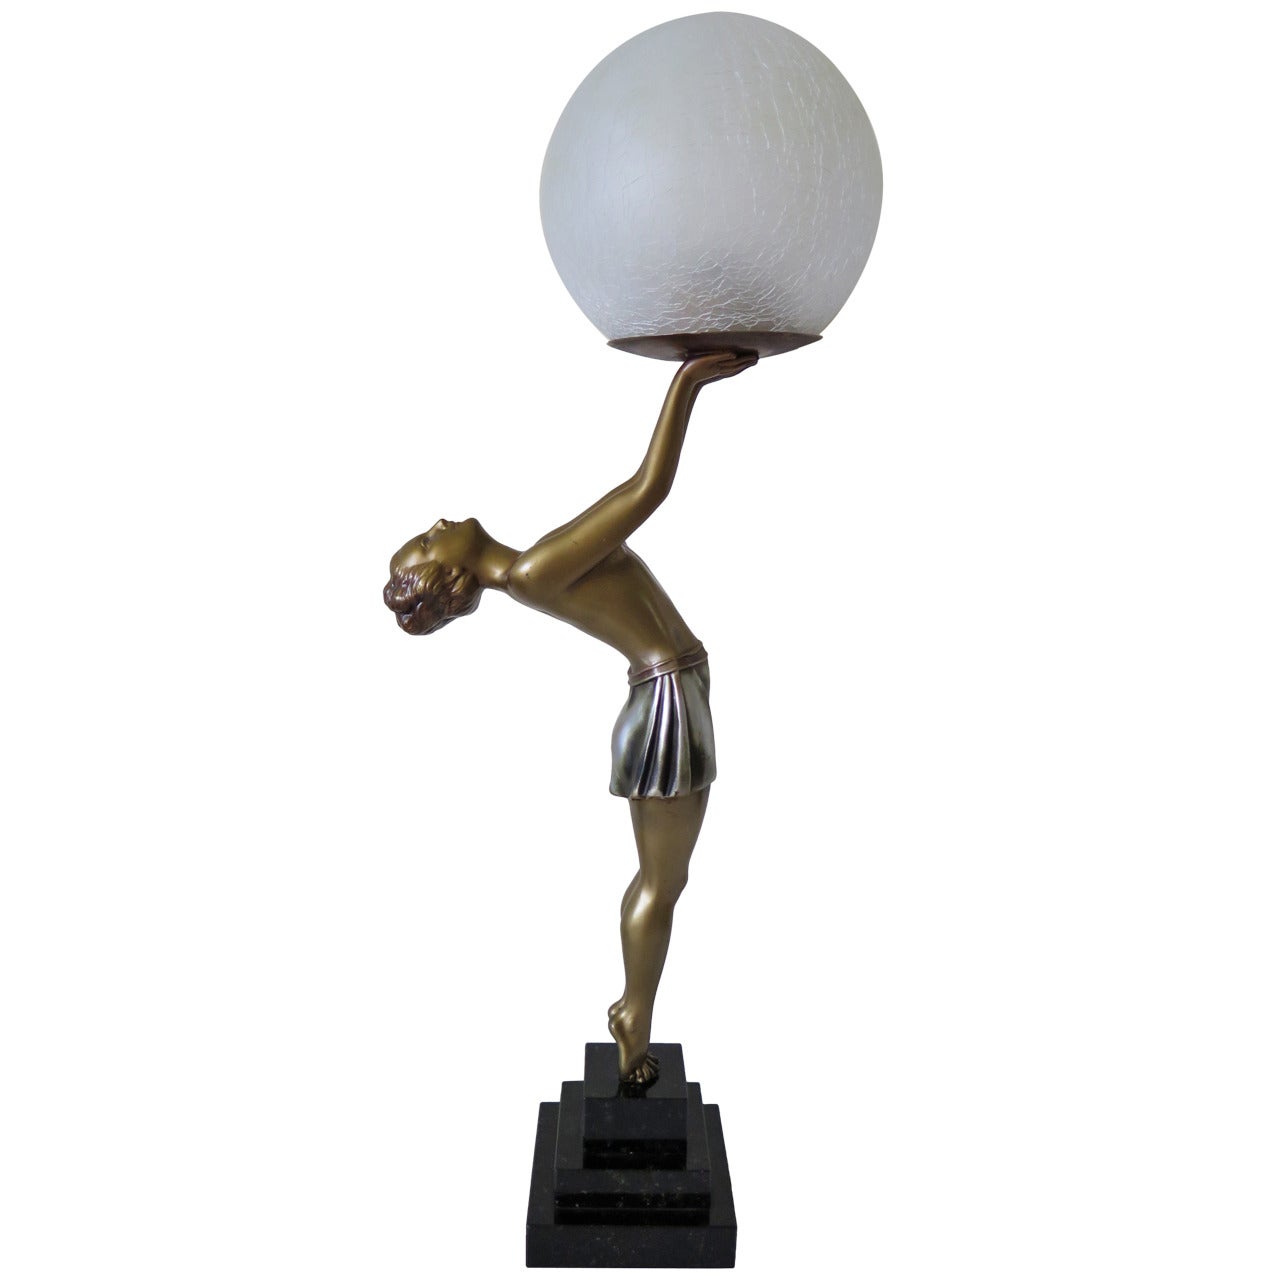 Biba Figurine Table Lamp Art Deco after Max Le-Verrier, Cold Painted, Ca 1930.